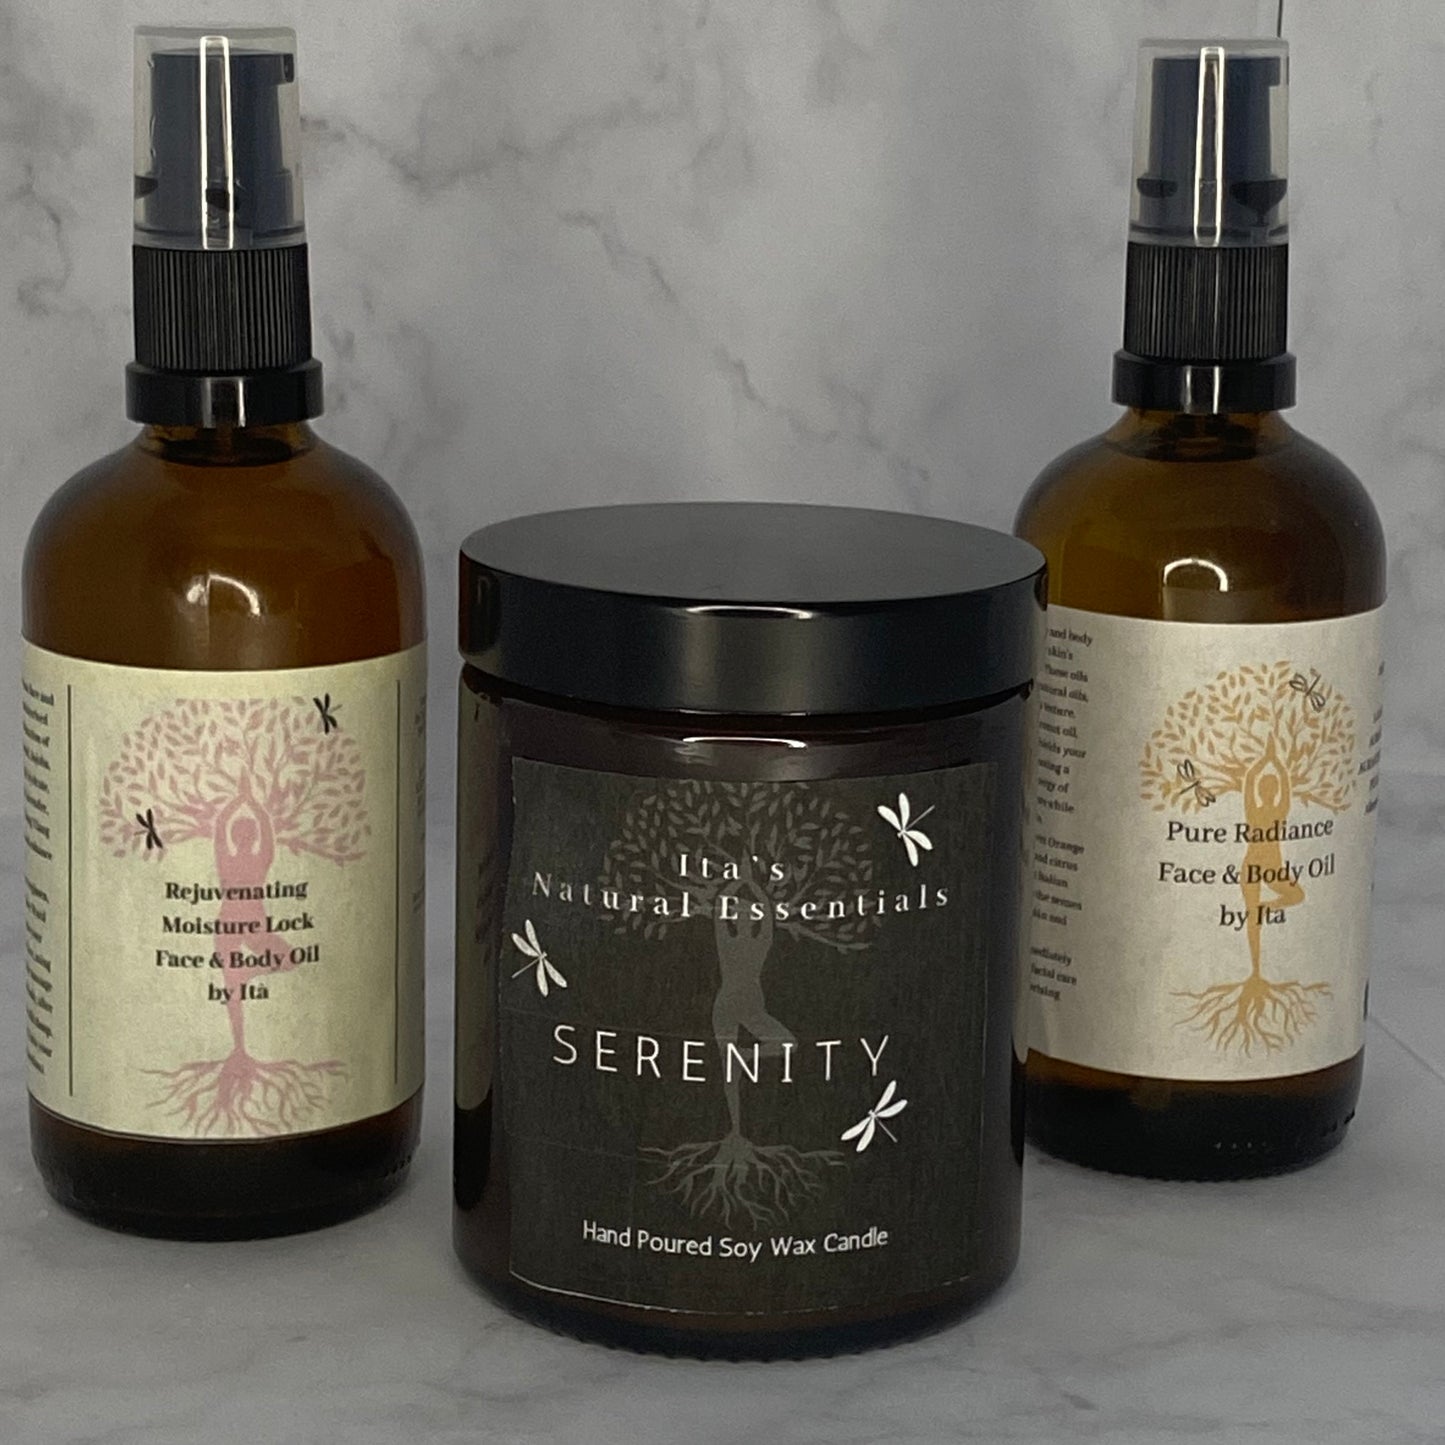 Serenity Aromatherapy Candle l Essential Oils l Vegan I 100% Soy Wax l Selfcare I Ita's Natural Essentials.